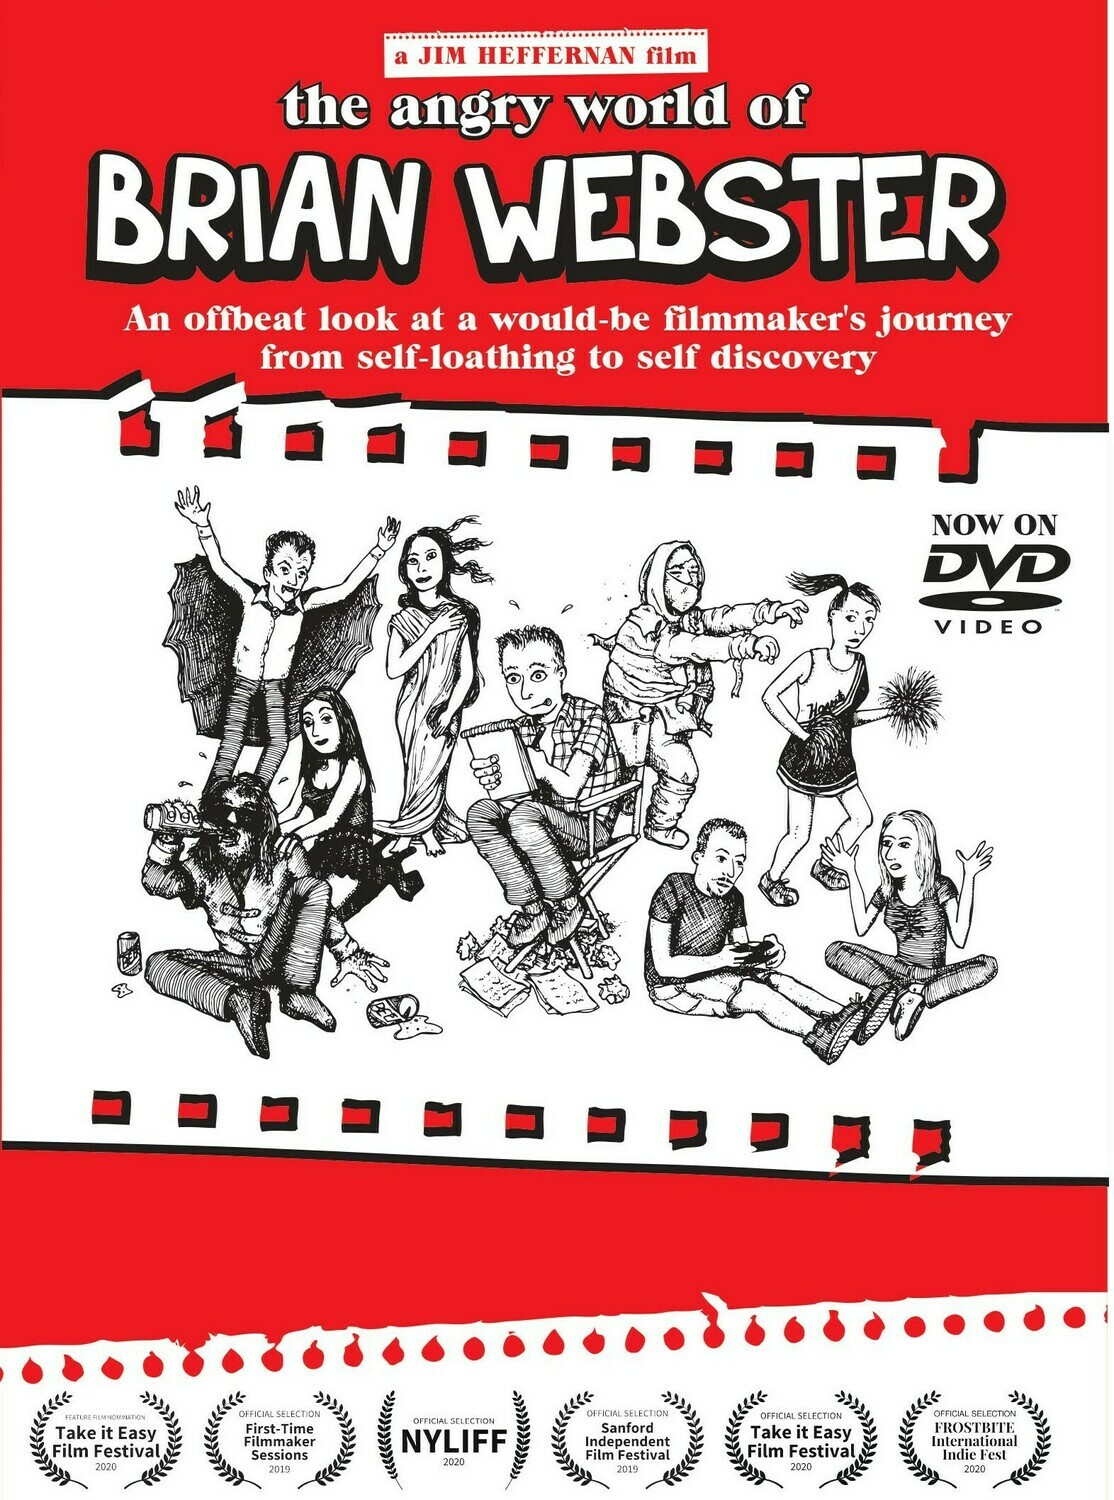 "The Angry World of Brian Webster" DVD